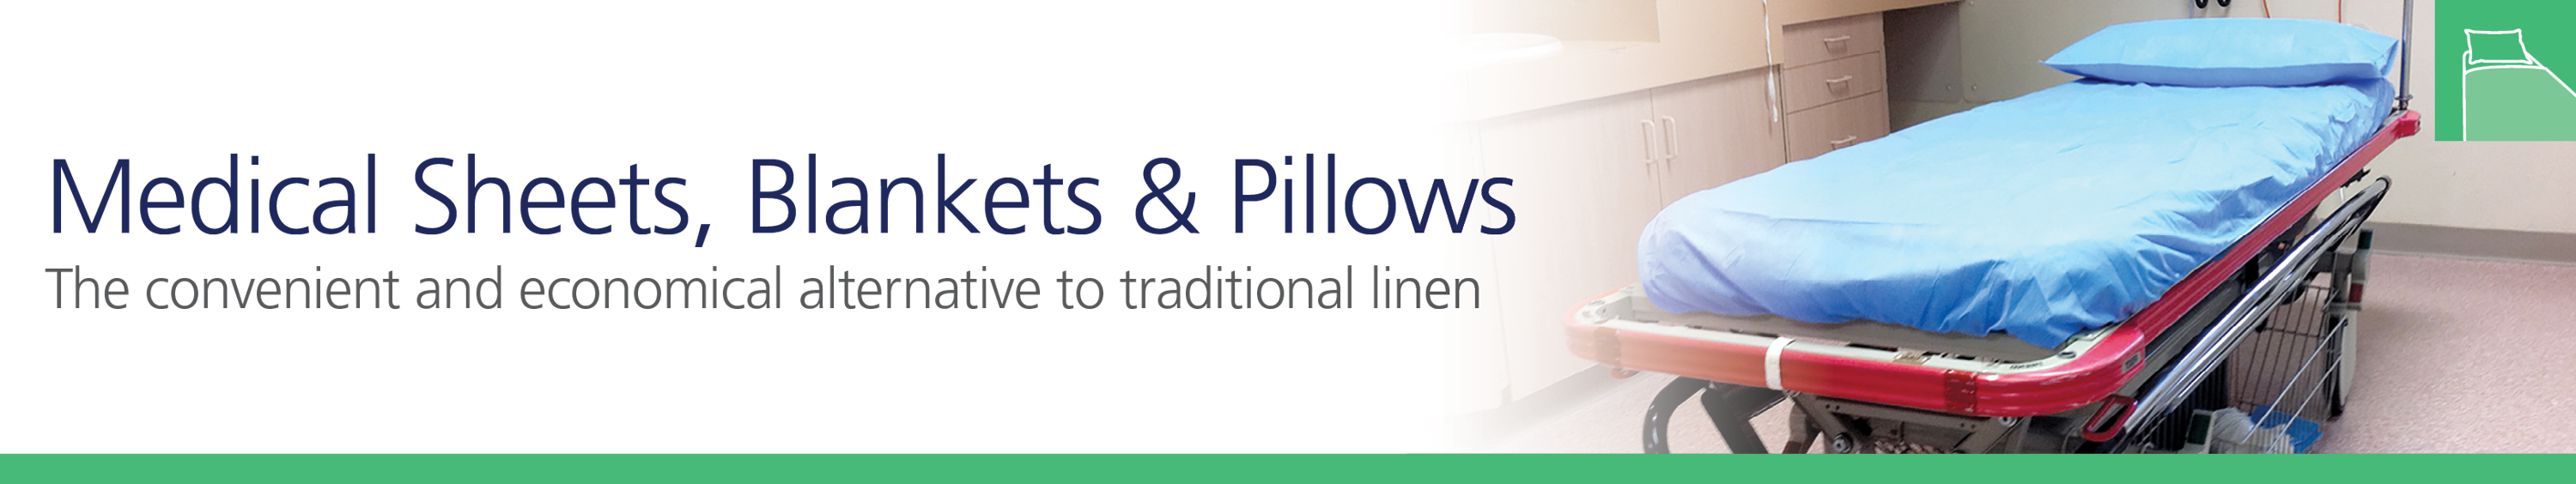 Haines Medical Sheets Blankets and Pillows